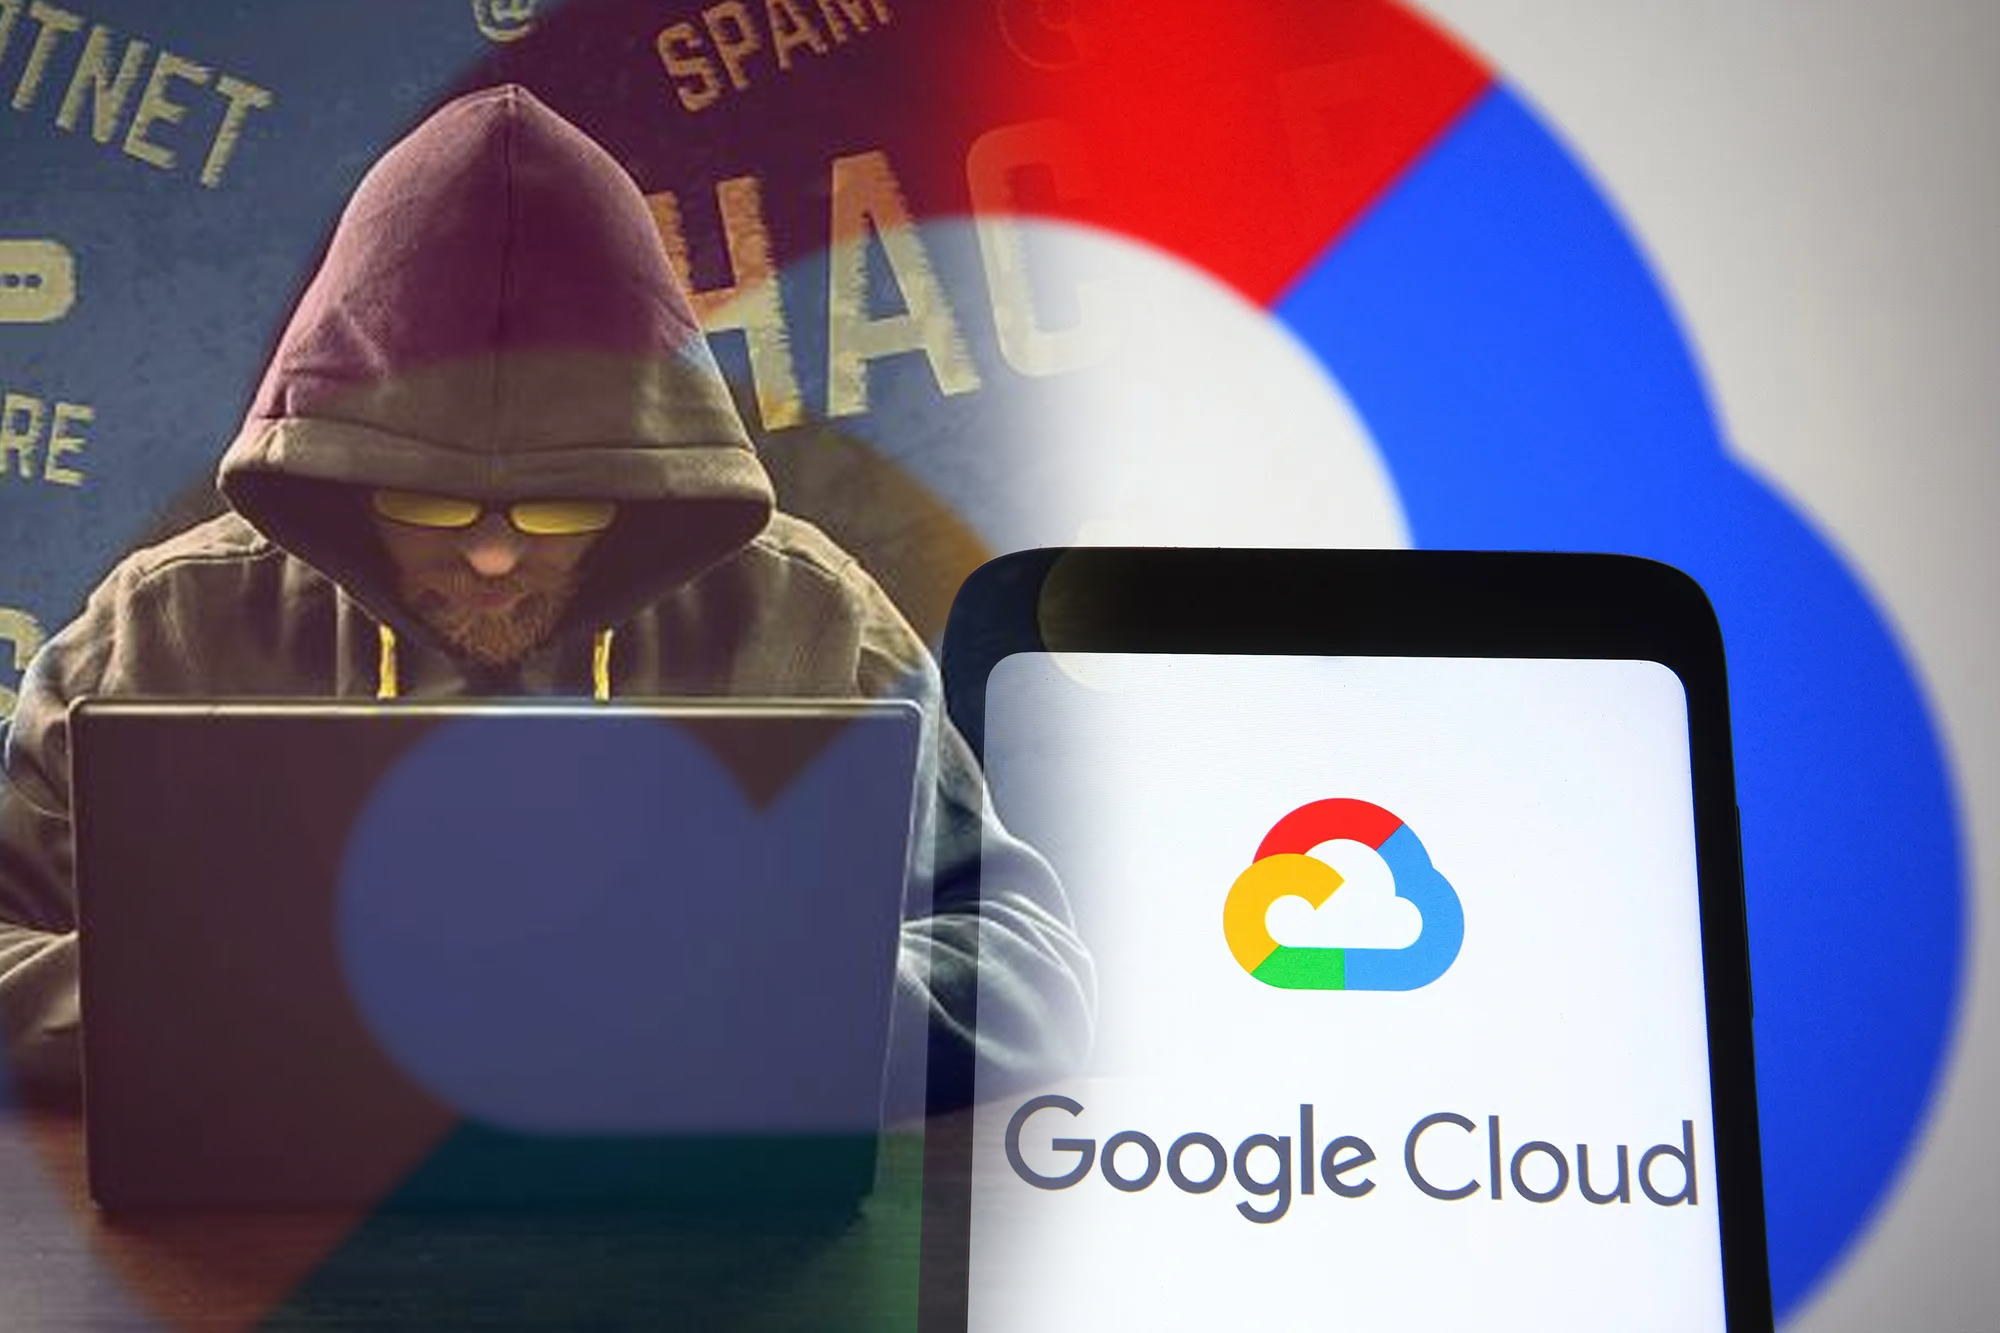 In a report published by Google, they point out that hackers use accounts in the cloud to carry out mining activities for cryptocurrencies such as bitcoin.